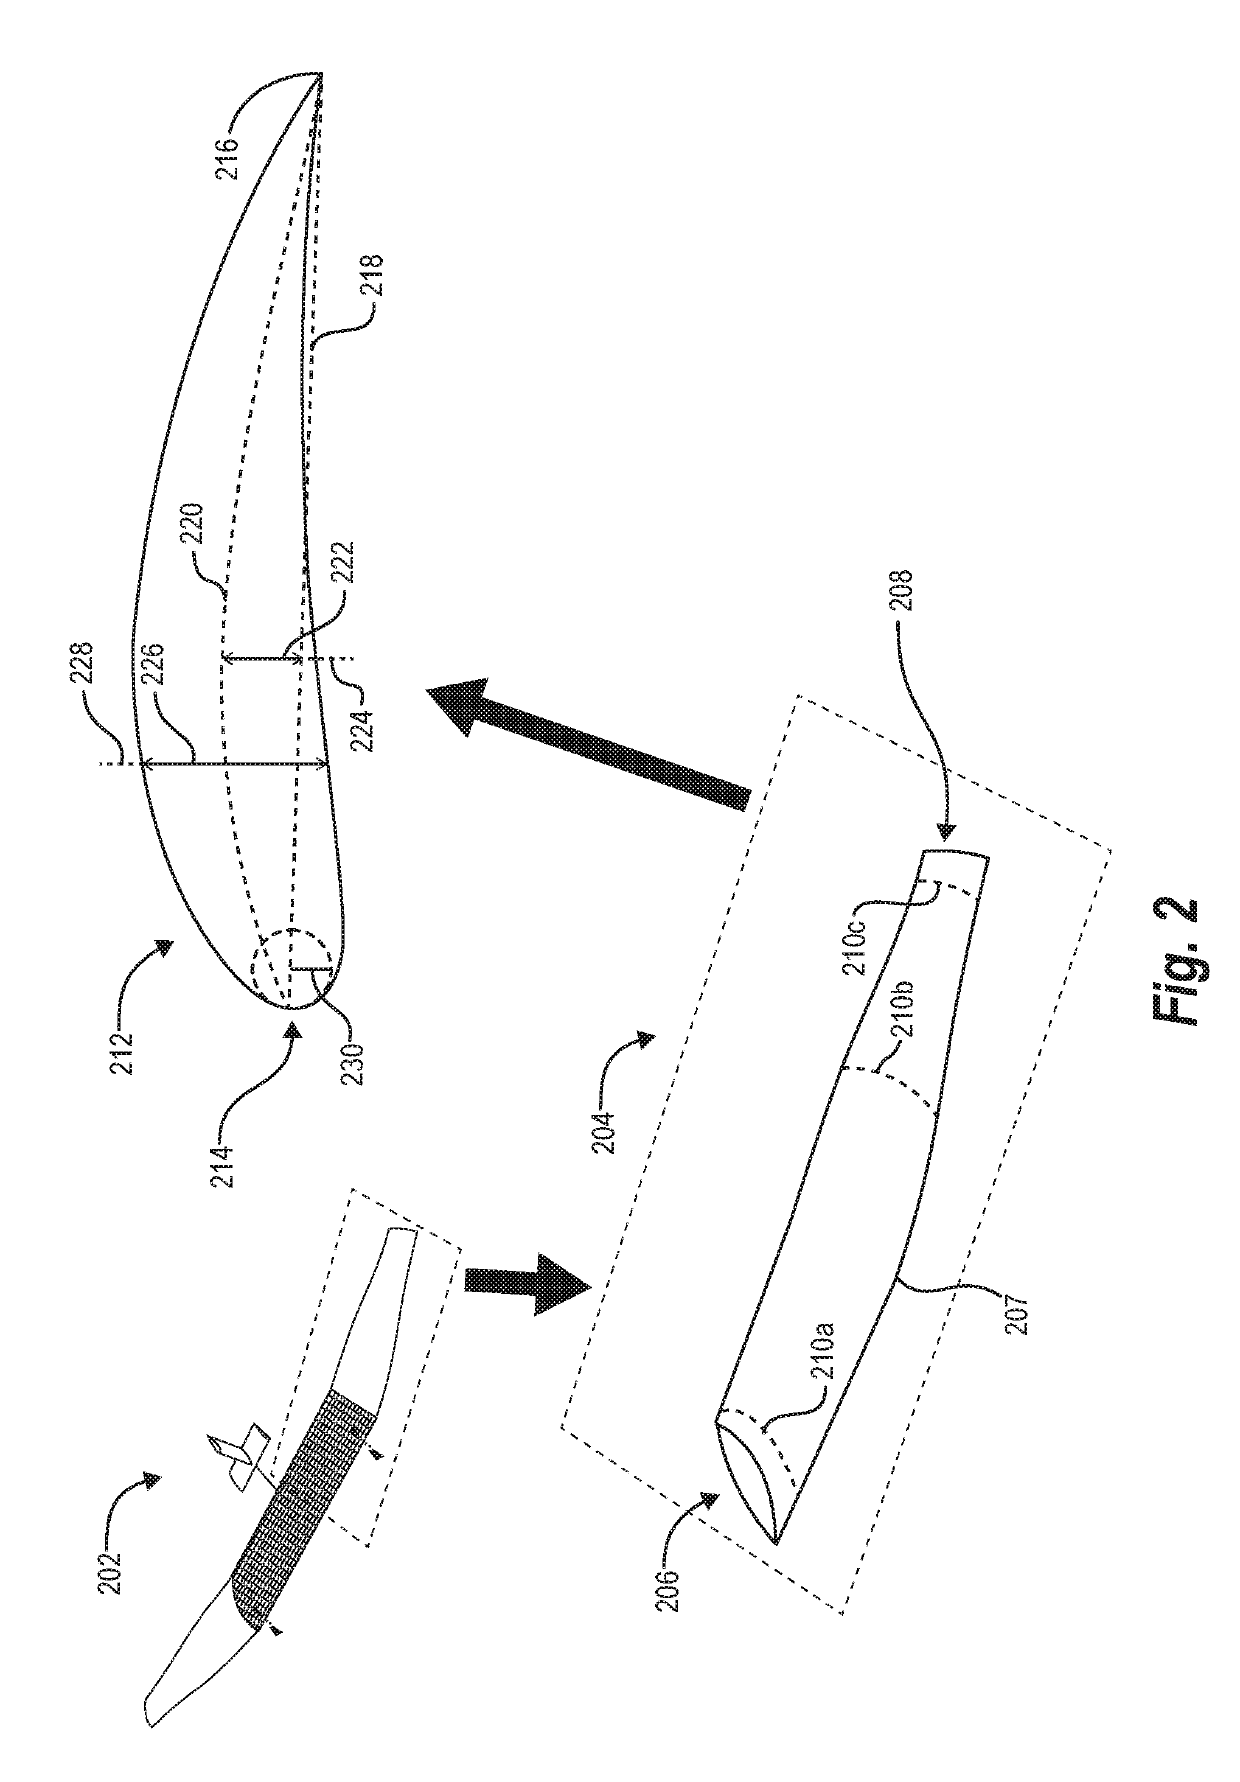 Automatic airfoil and wing design based on dynamic modeling of structural and aerodynamic performance